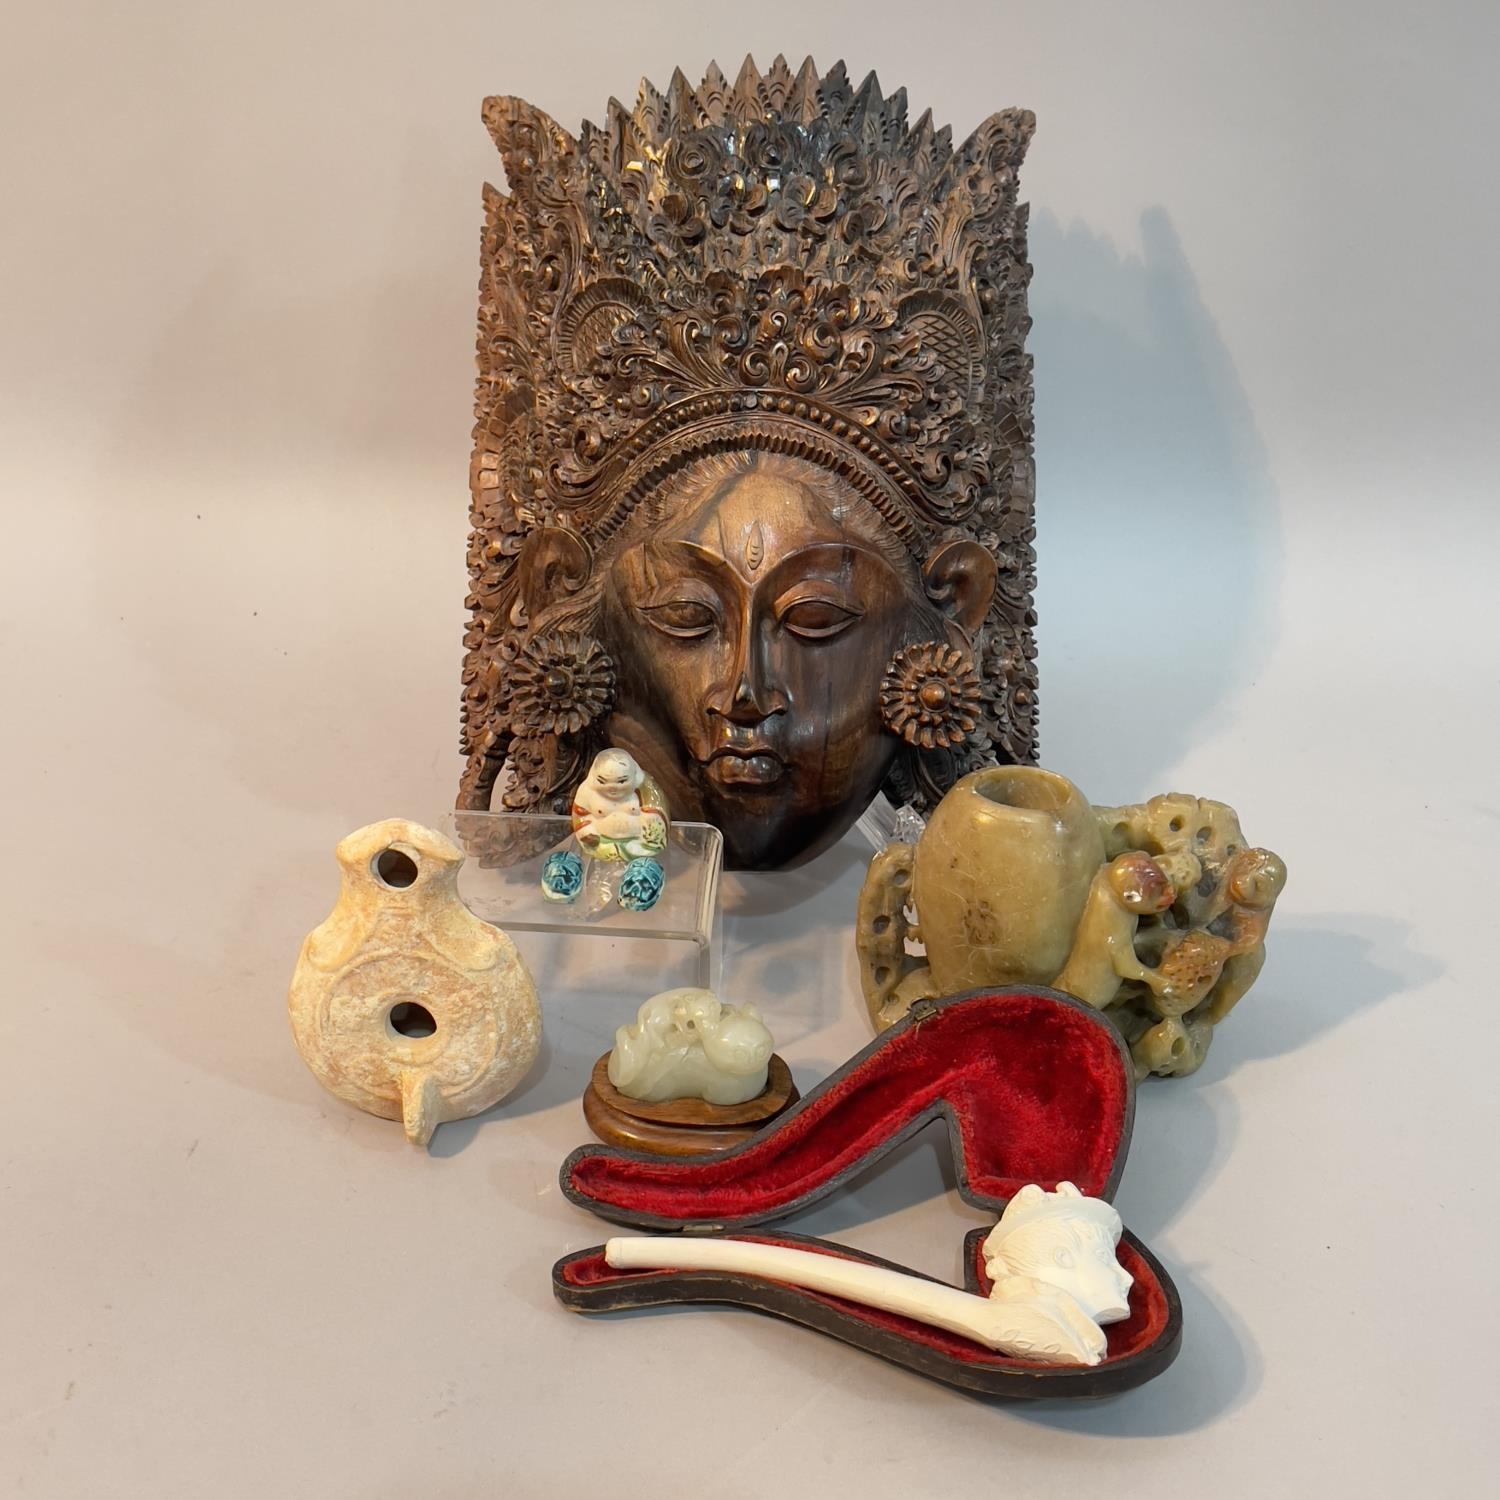 A Thai hardwood facemask with elaborately carved head dress together with a soapstone carved vase